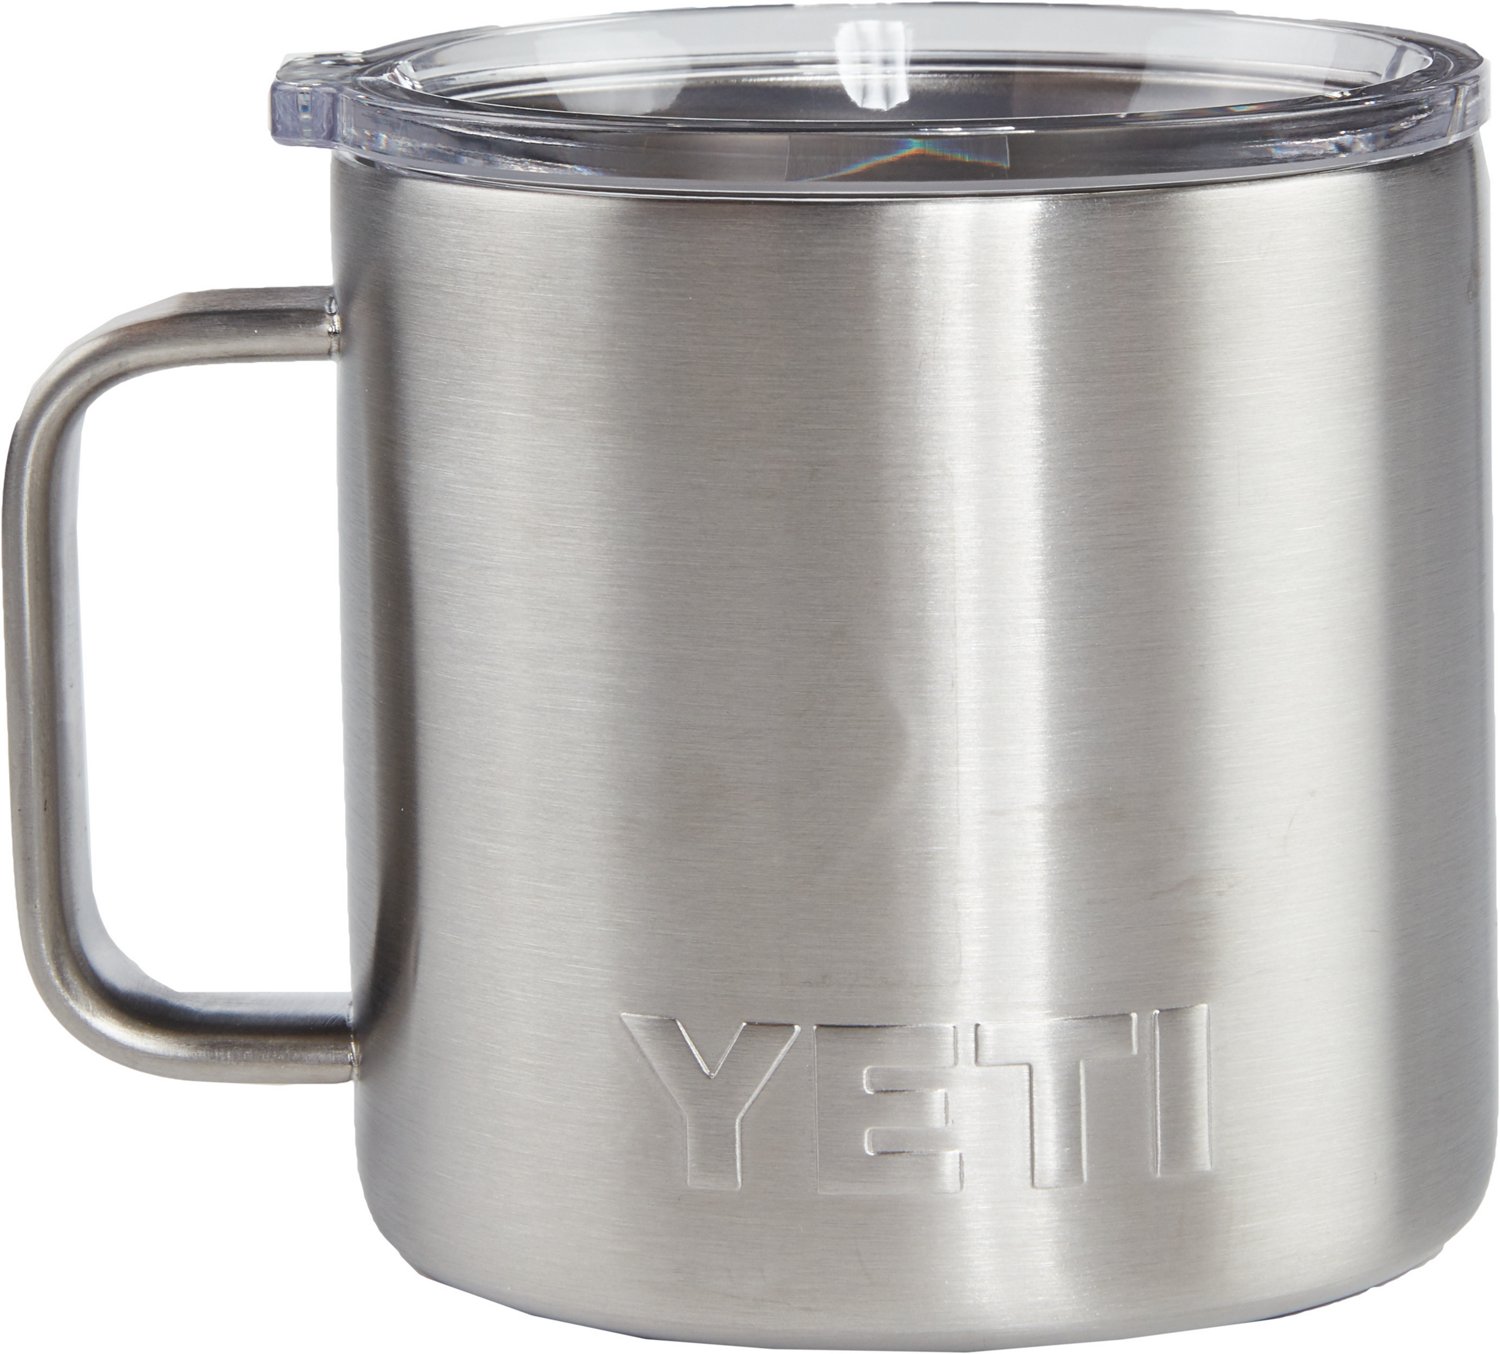 pink yeti cup academy